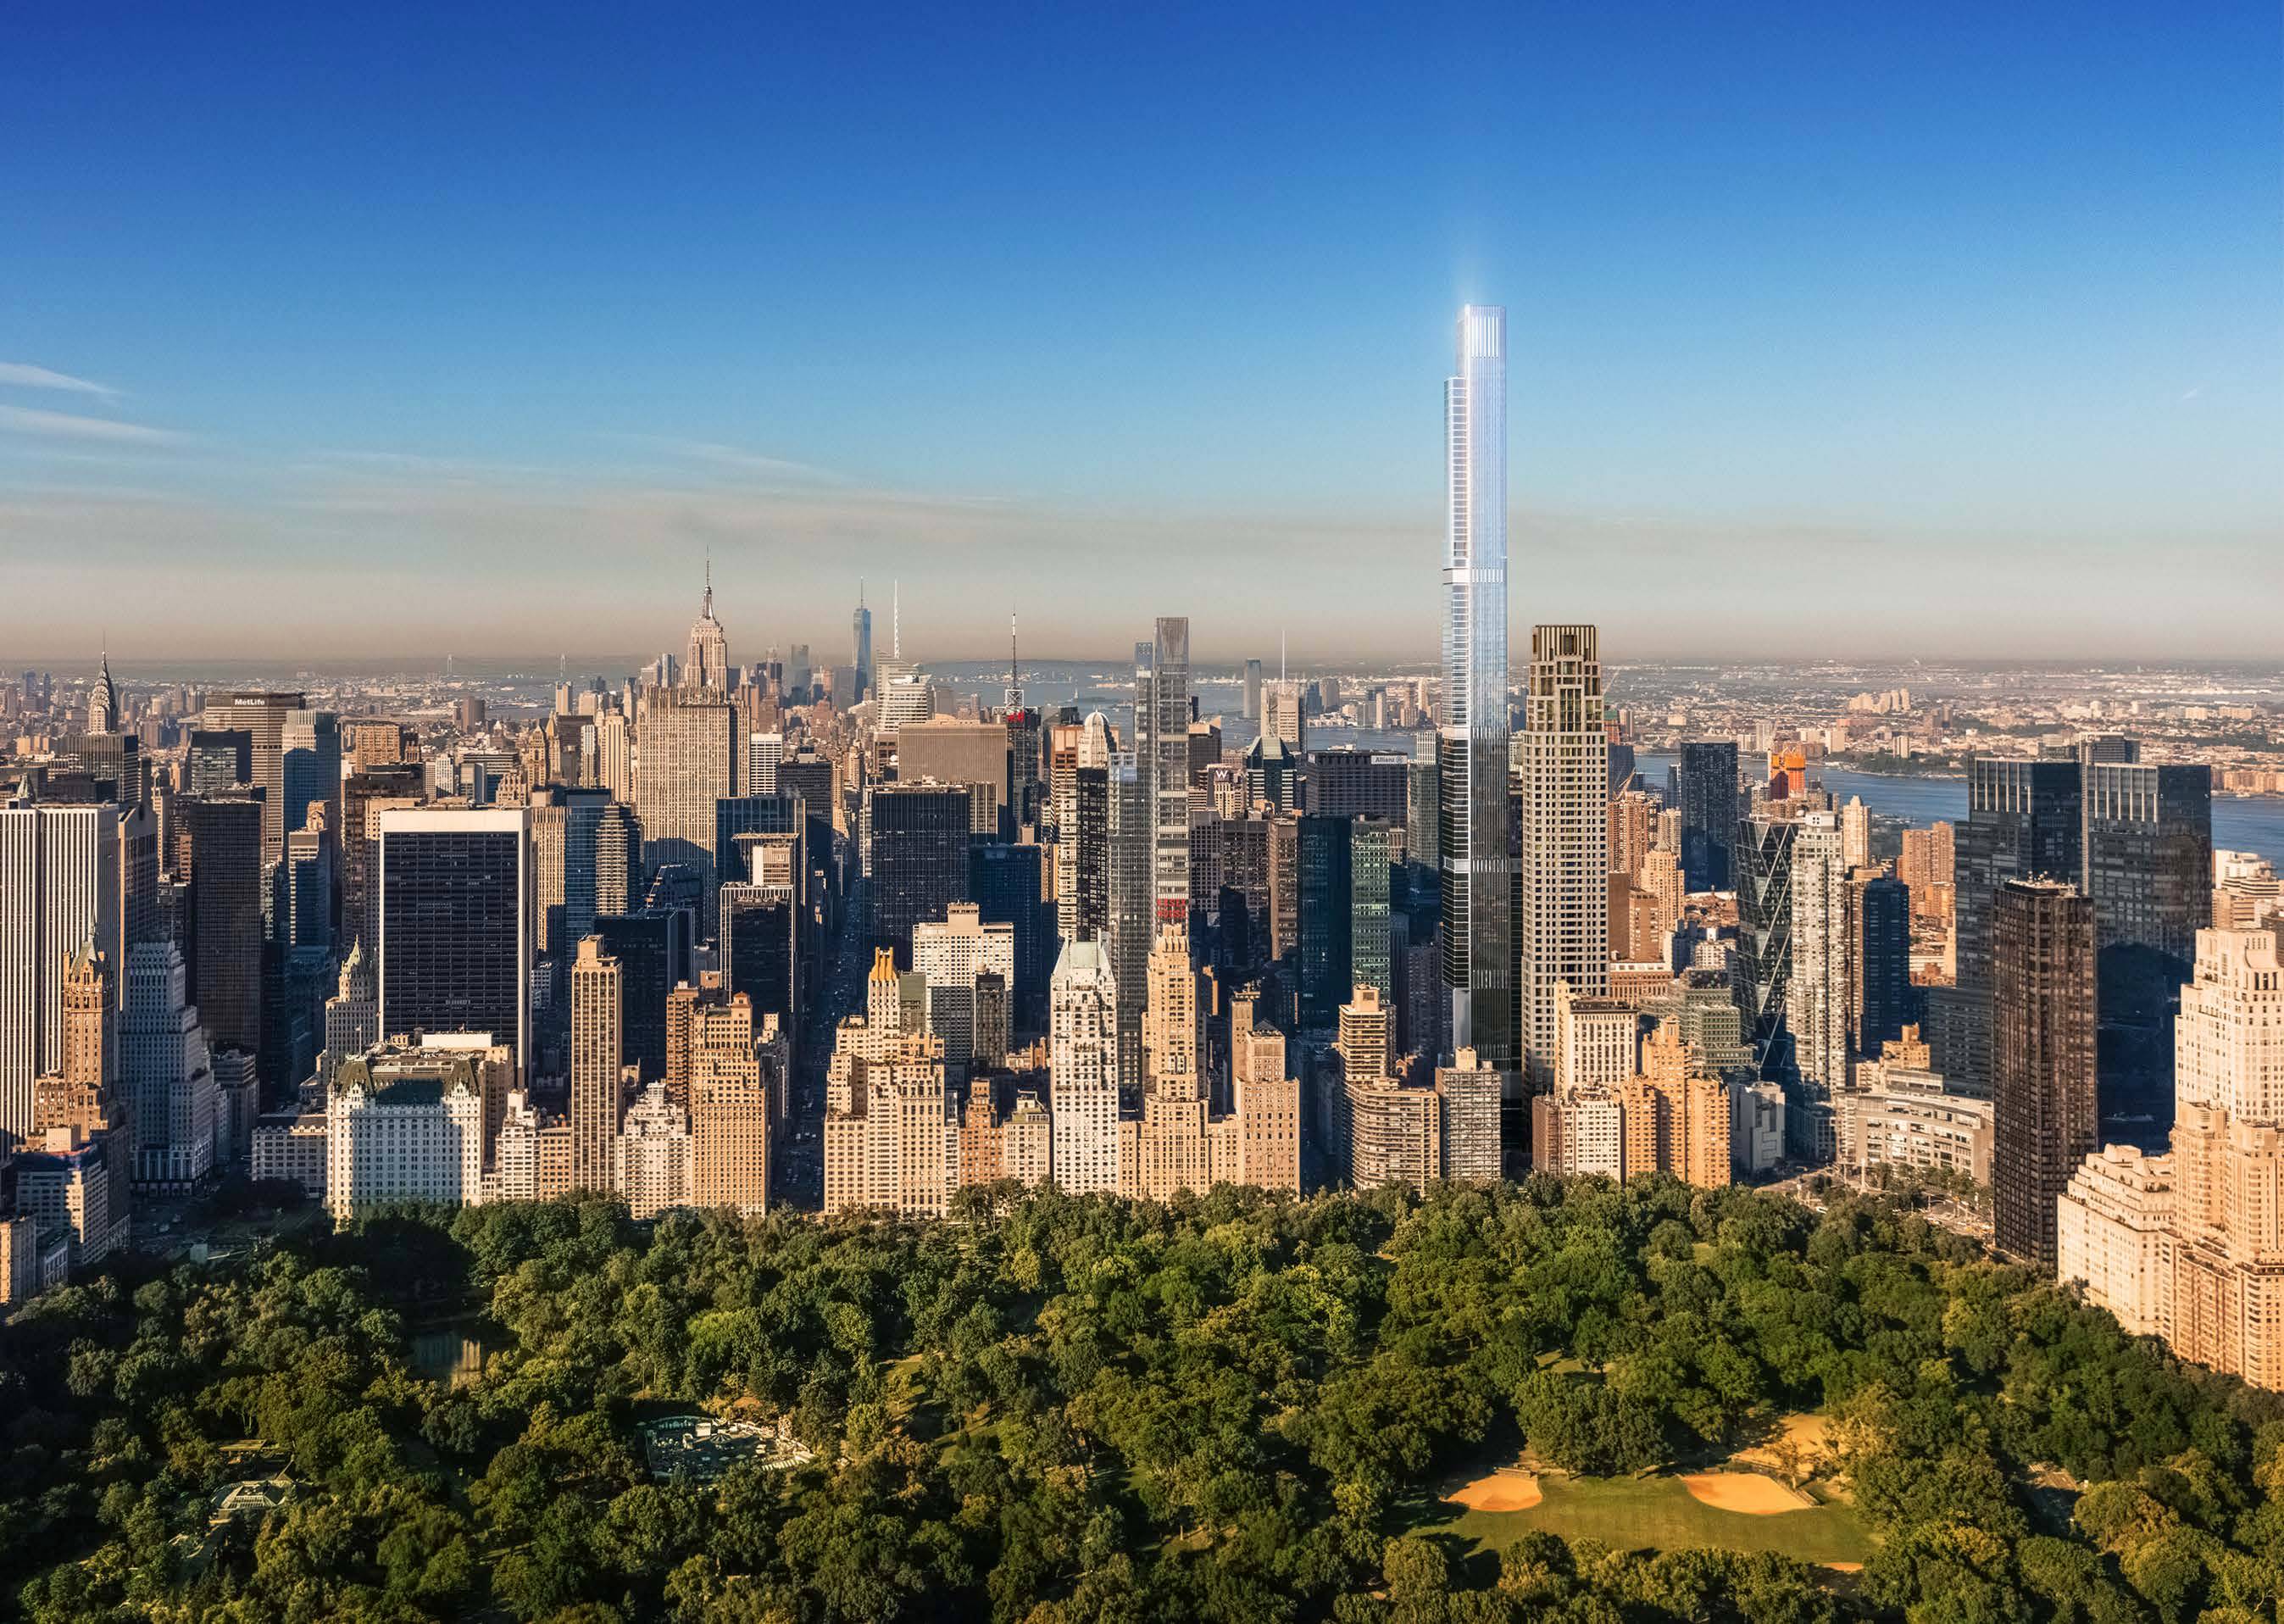 Reside over 850' above New York City in this half floor residence at Central Park Tower.